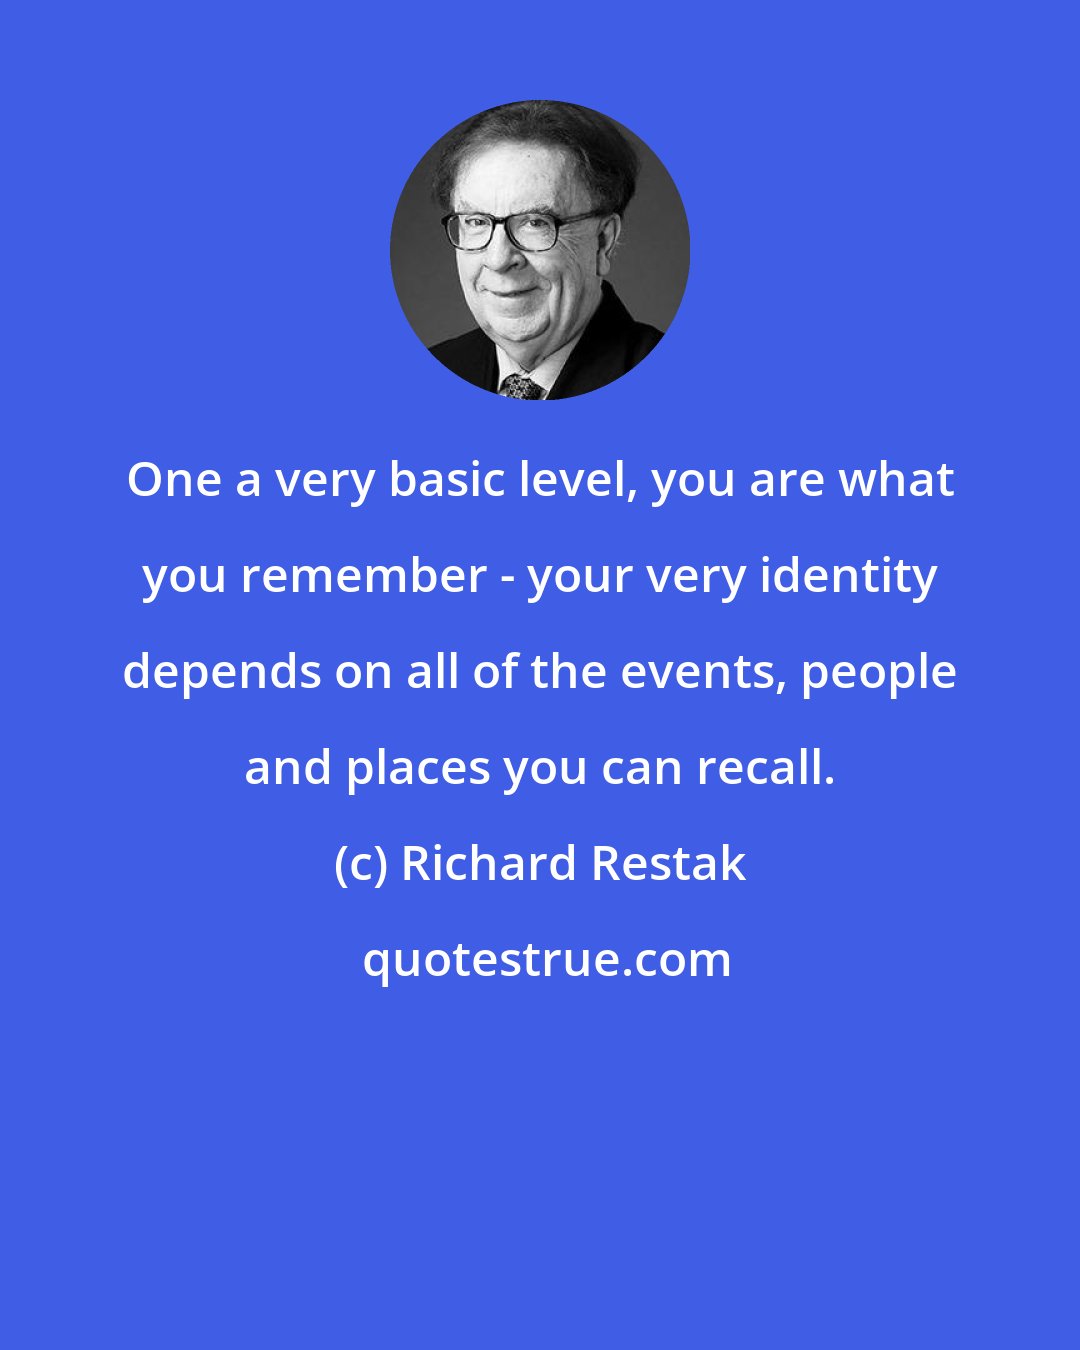 Richard Restak: One a very basic level, you are what you remember - your very identity depends on all of the events, people and places you can recall.